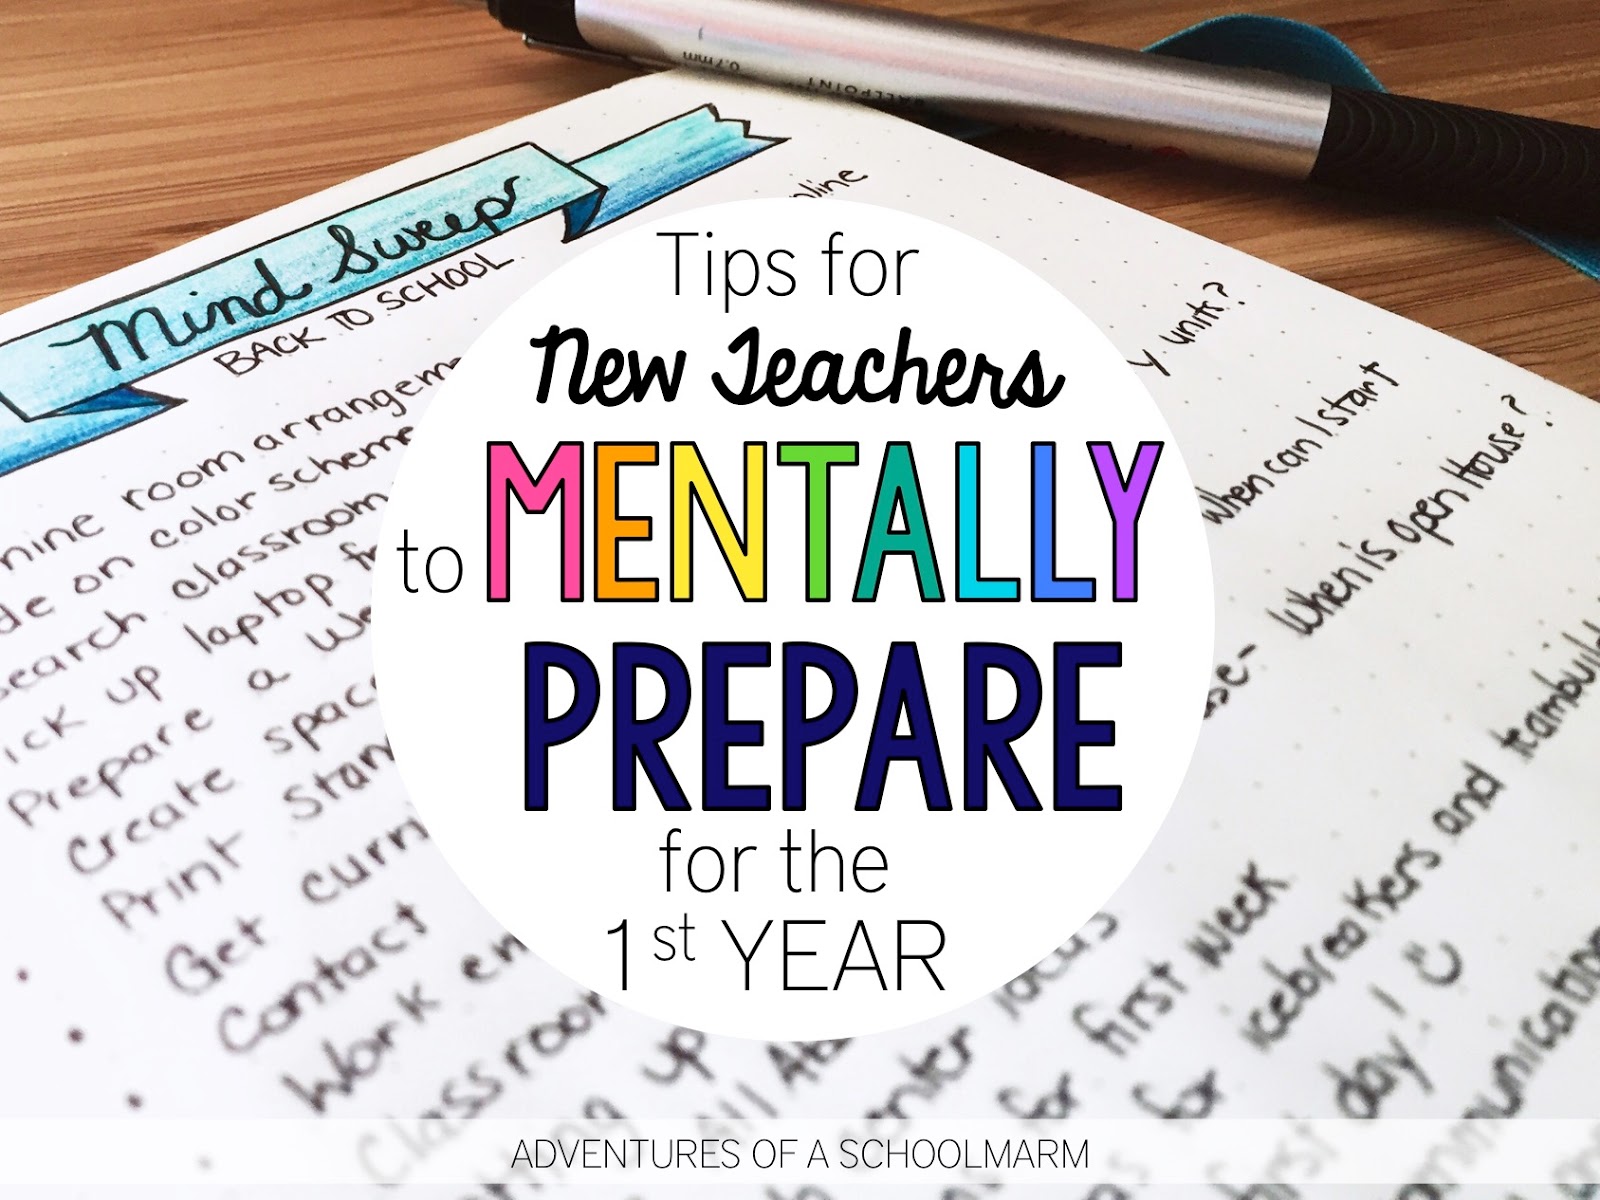 Do you need ideas about how to prepare for your first year teaching?  Are you overwhelmed with no idea where to start? This post focuses on strategies to mentally prepare for your first year of teaching. // Adventures of a Schoolmarm